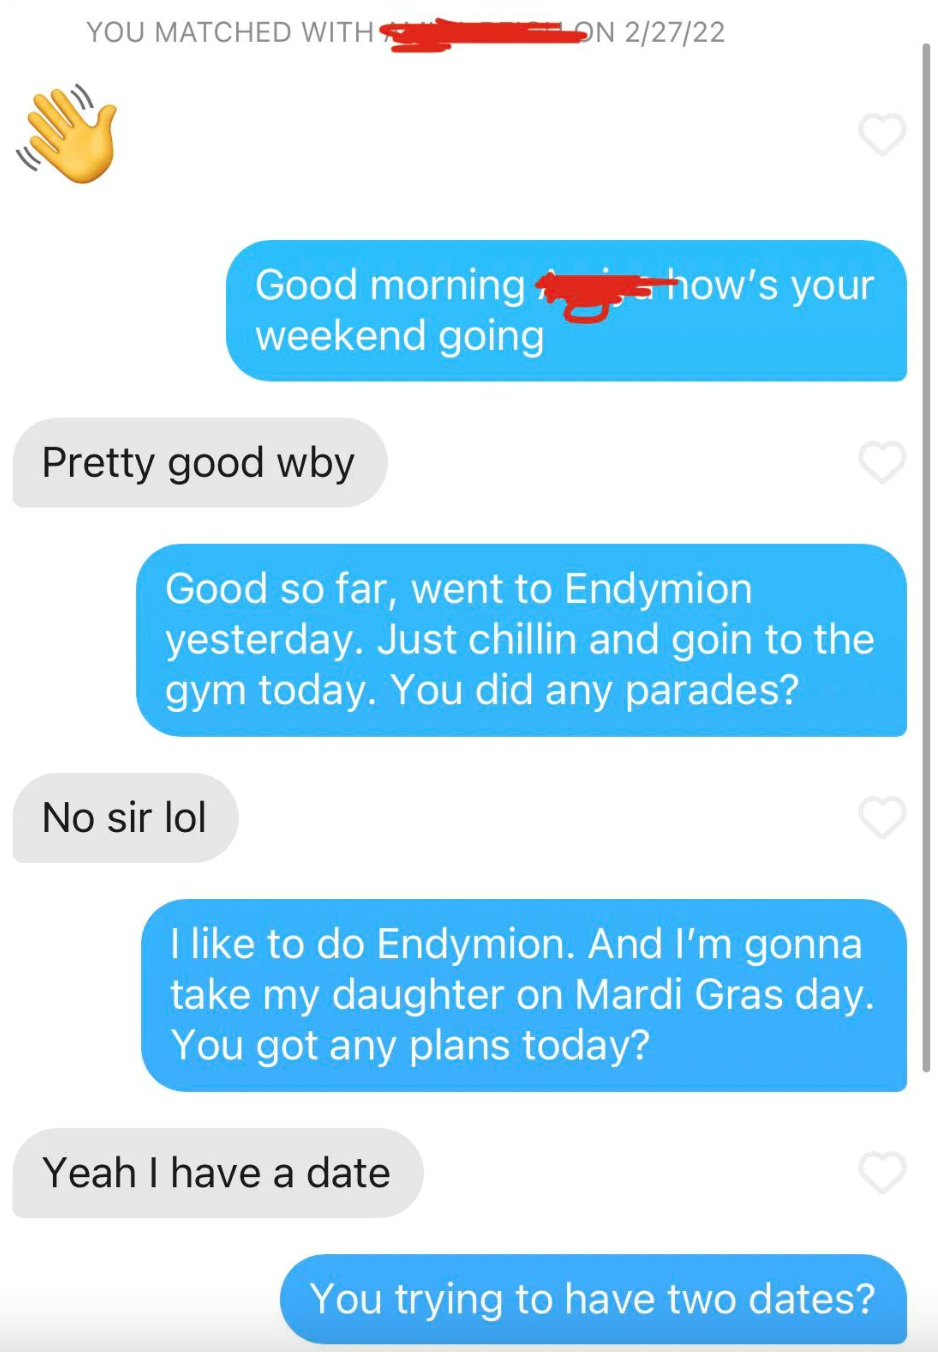 Screen shot of a Tinder exchange where a person says, &quot;Yeah I have a date&quot;